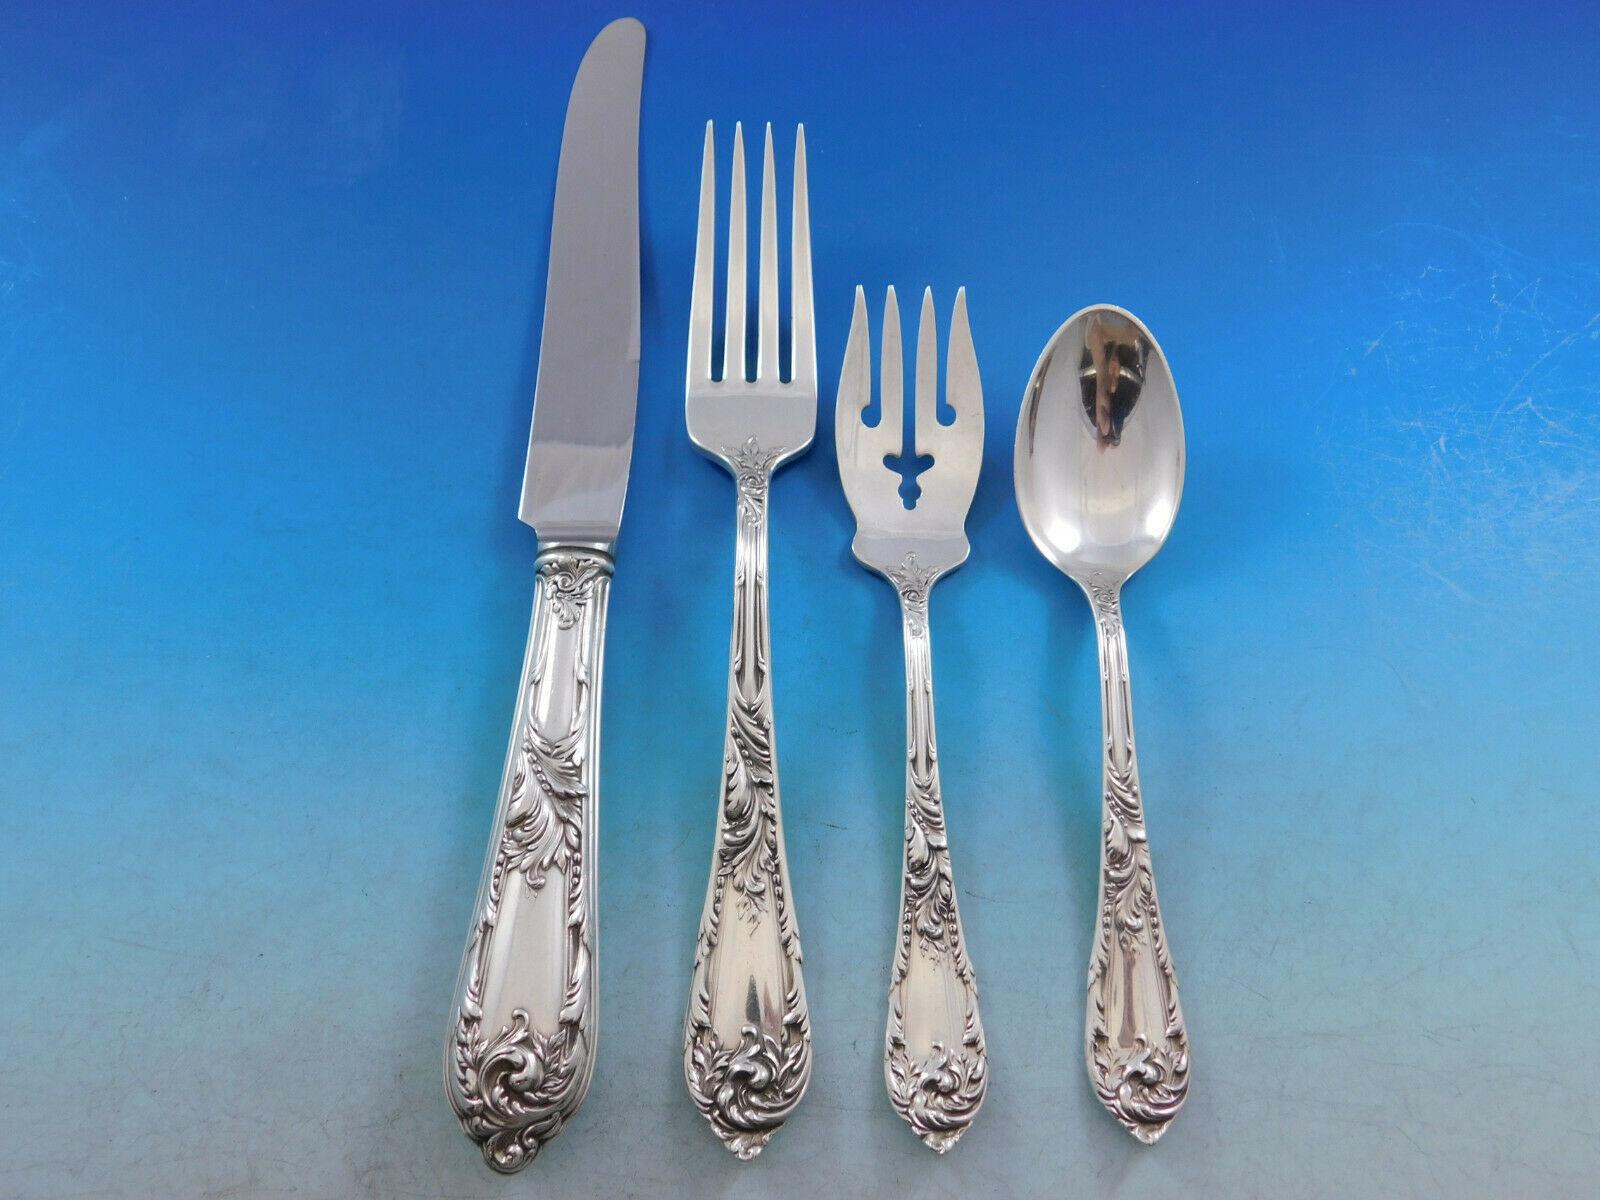 Monumental Romaine by Reed and Barton circa 1933 Sterling Silver flatware set - 198 pieces. This set includes:


12 dinner size knives, 9 3/4